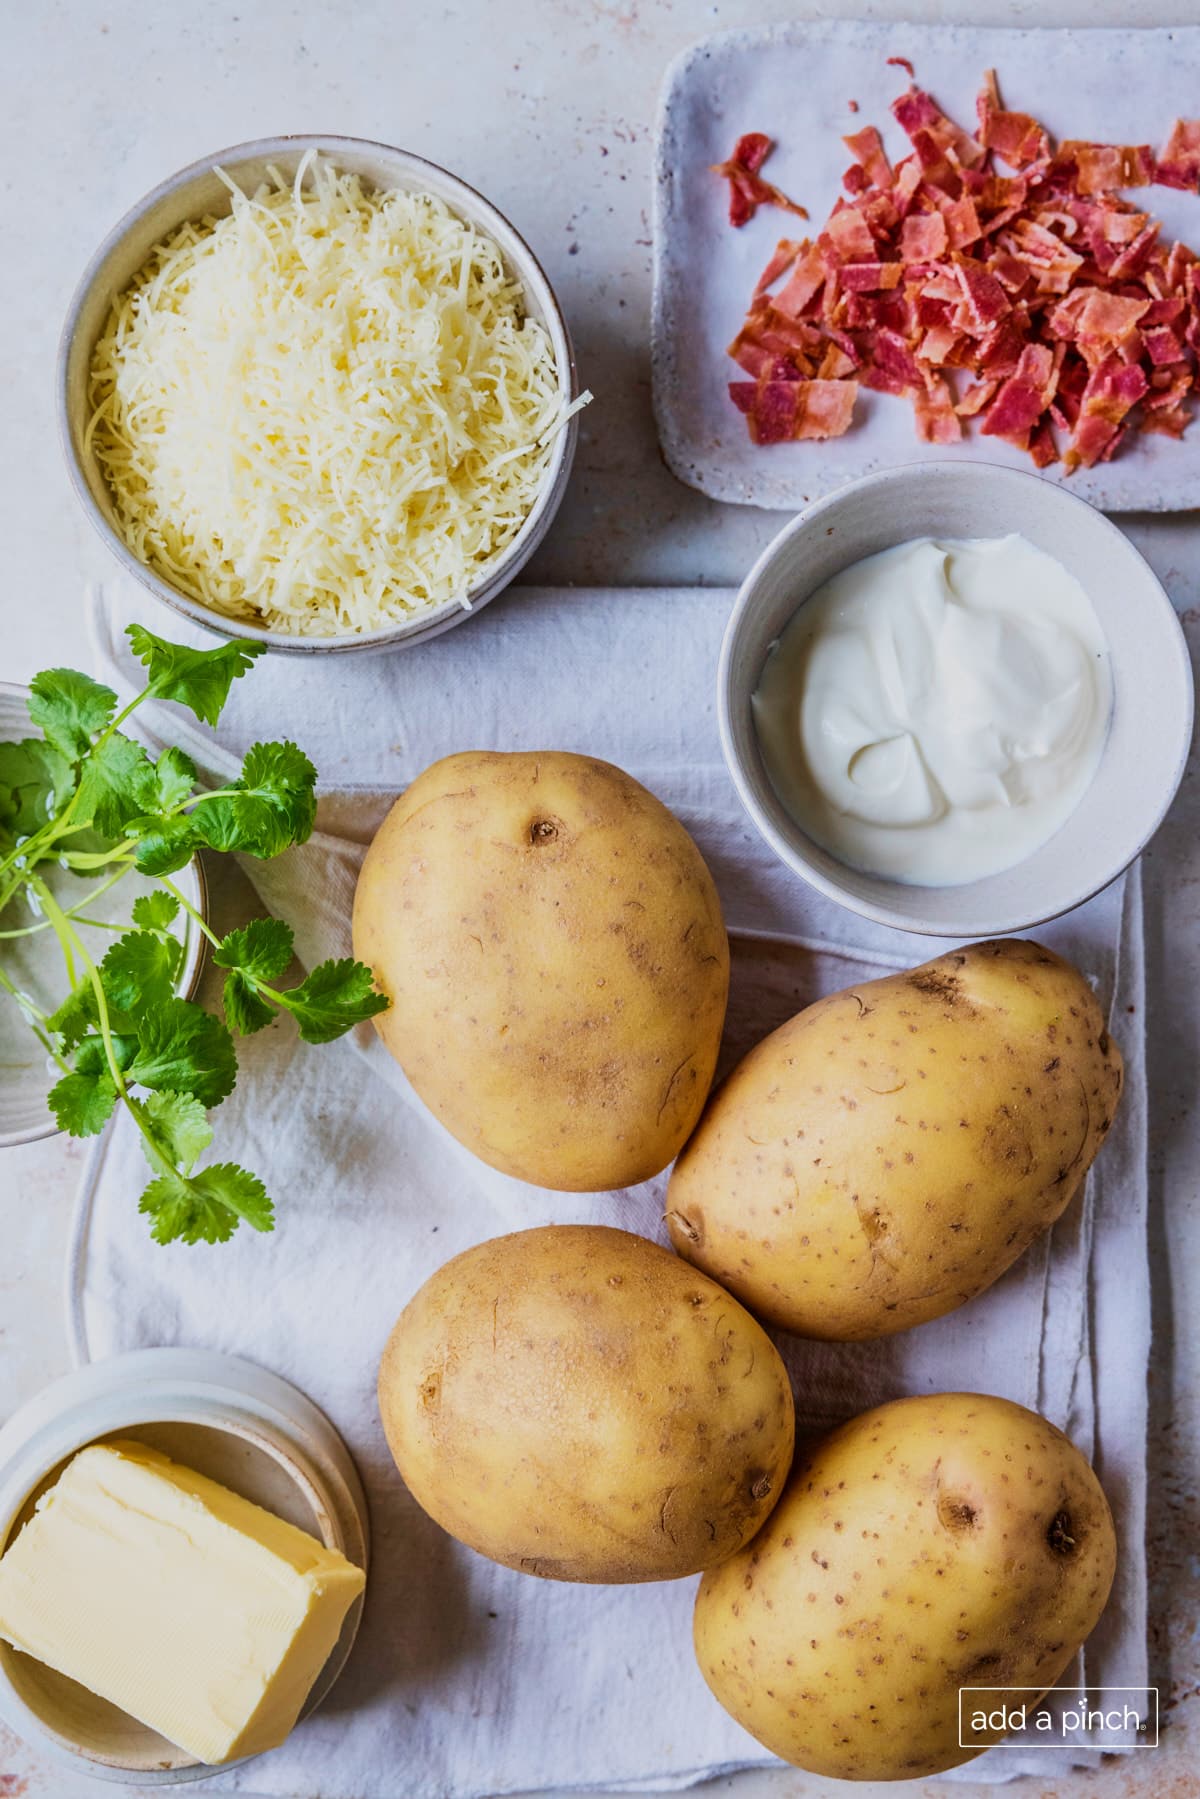 Ingredients used for making twice baked potato recipe